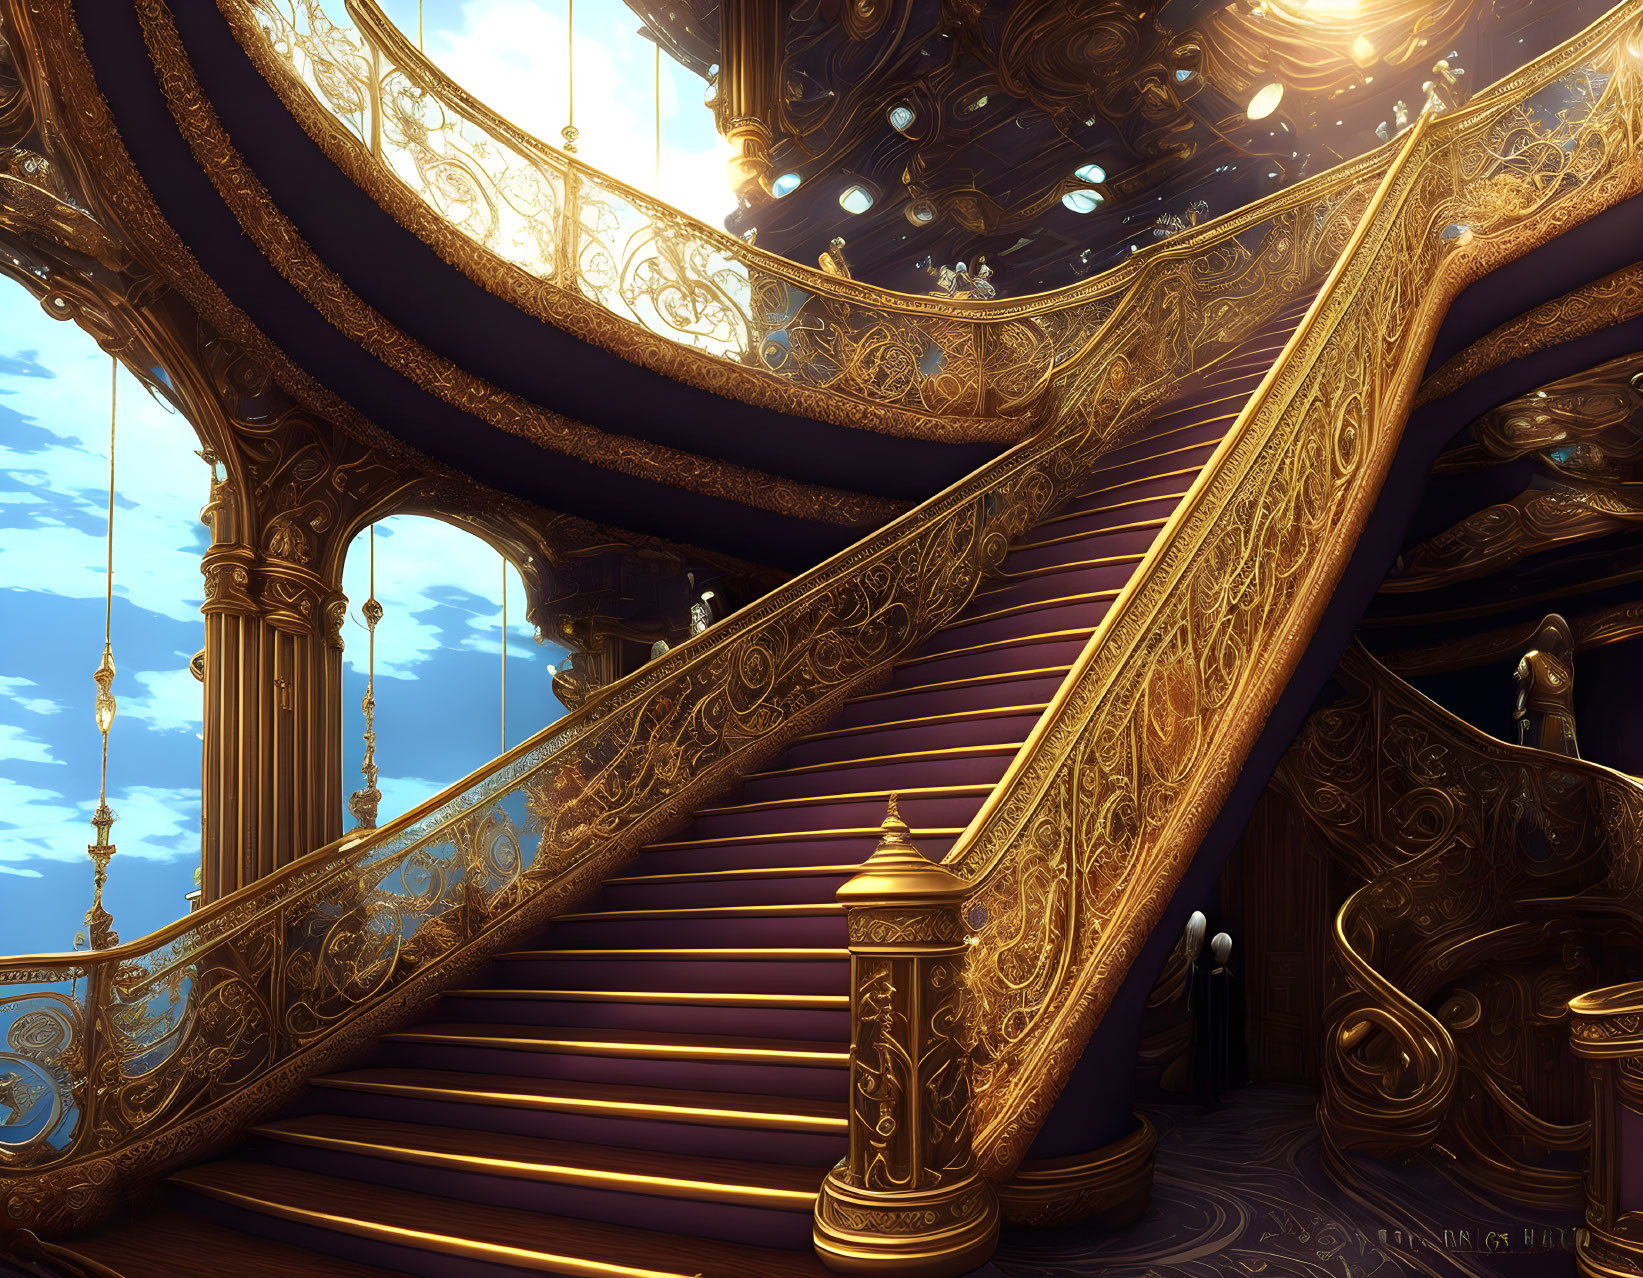 Luxurious staircase with golden details and blue hue, ornate banisters.